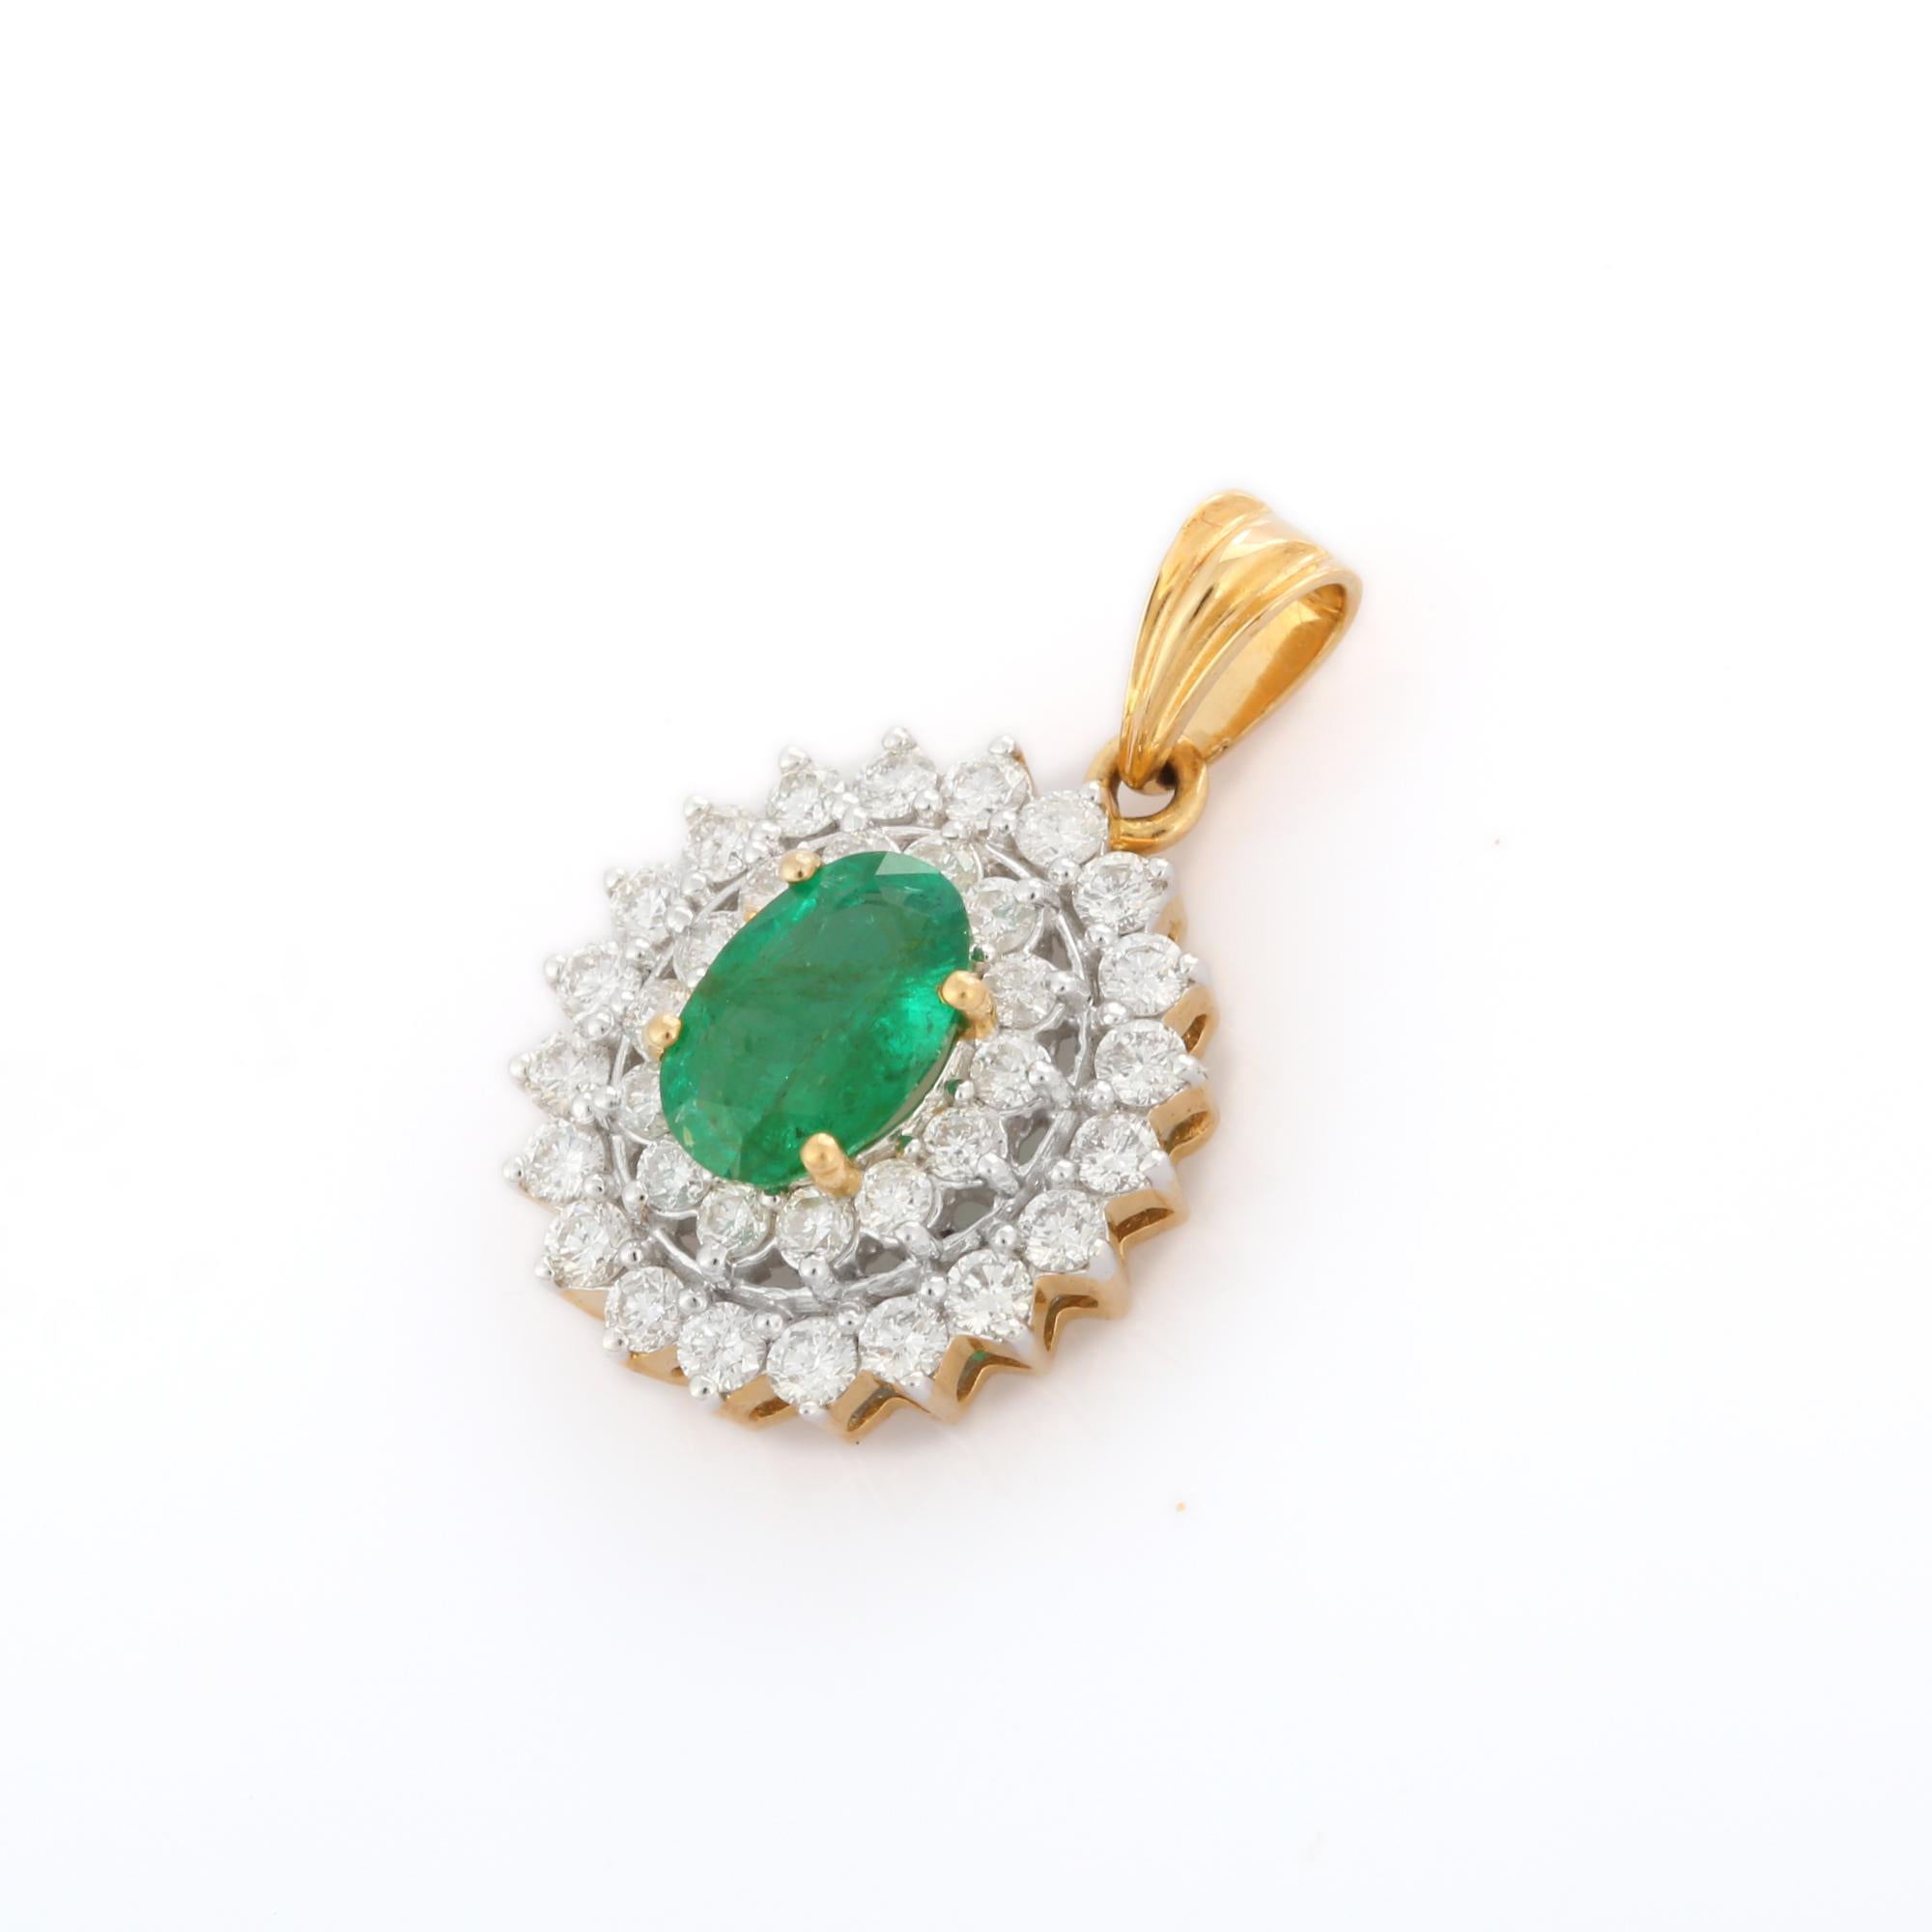 Natural Emerald pendant in 18K Gold. It has a oval cut emerald studded with diamonds that completes your look with a decent touch. Pendants are used to wear or gifted to represent love and promises. It's an attractive jewelry piece that goes with